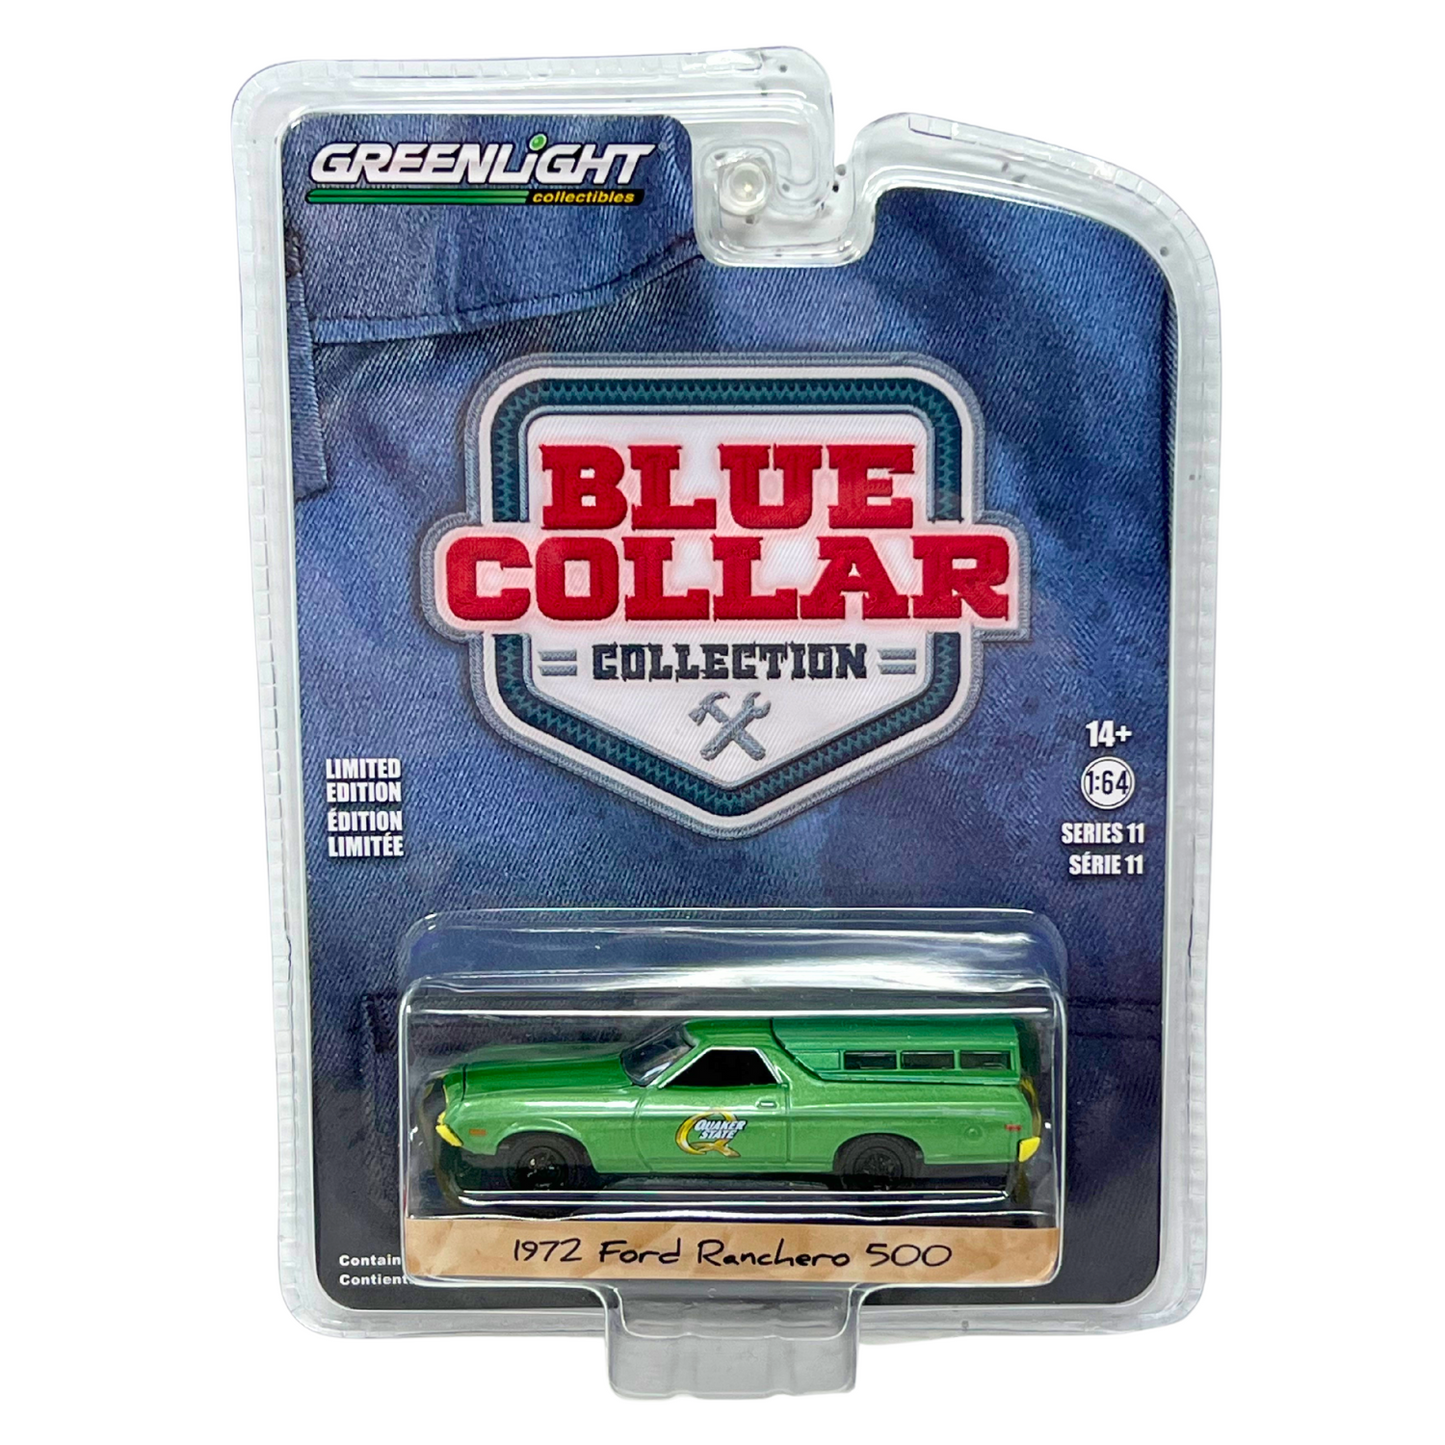 Greenlight Blue Collar Collection 1972 Ford Ranchero 500 1:64 Diecast